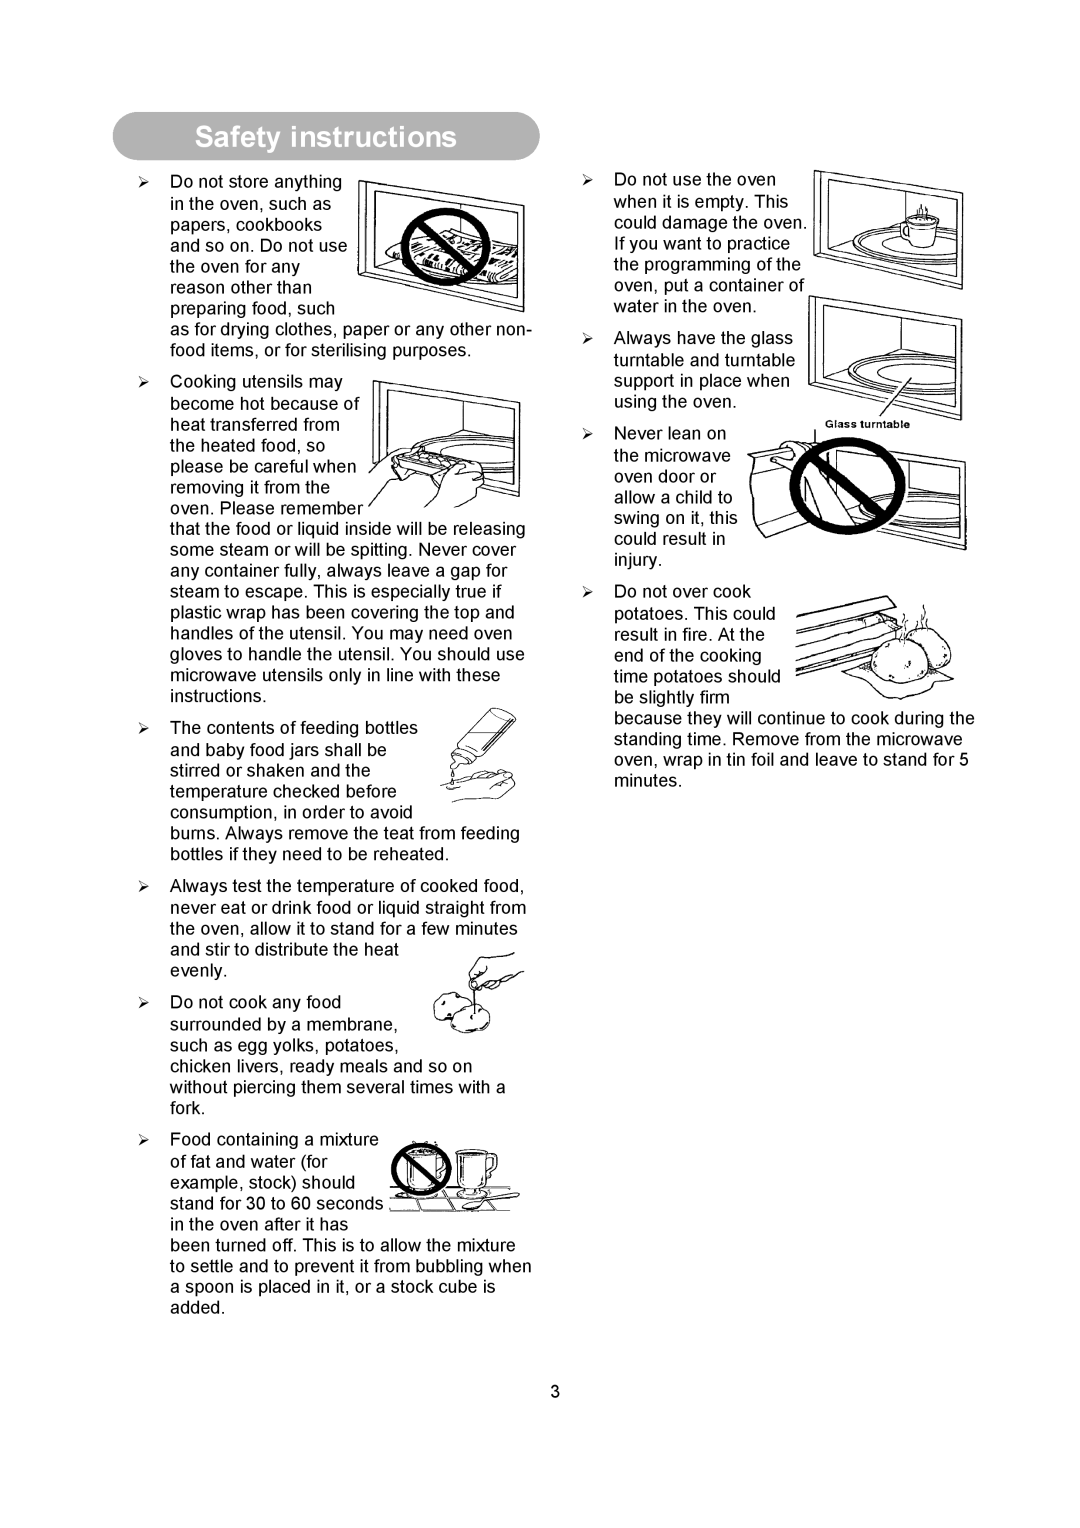 Russell Hobbs RHM2013 user manual Safety instructions, evenly 